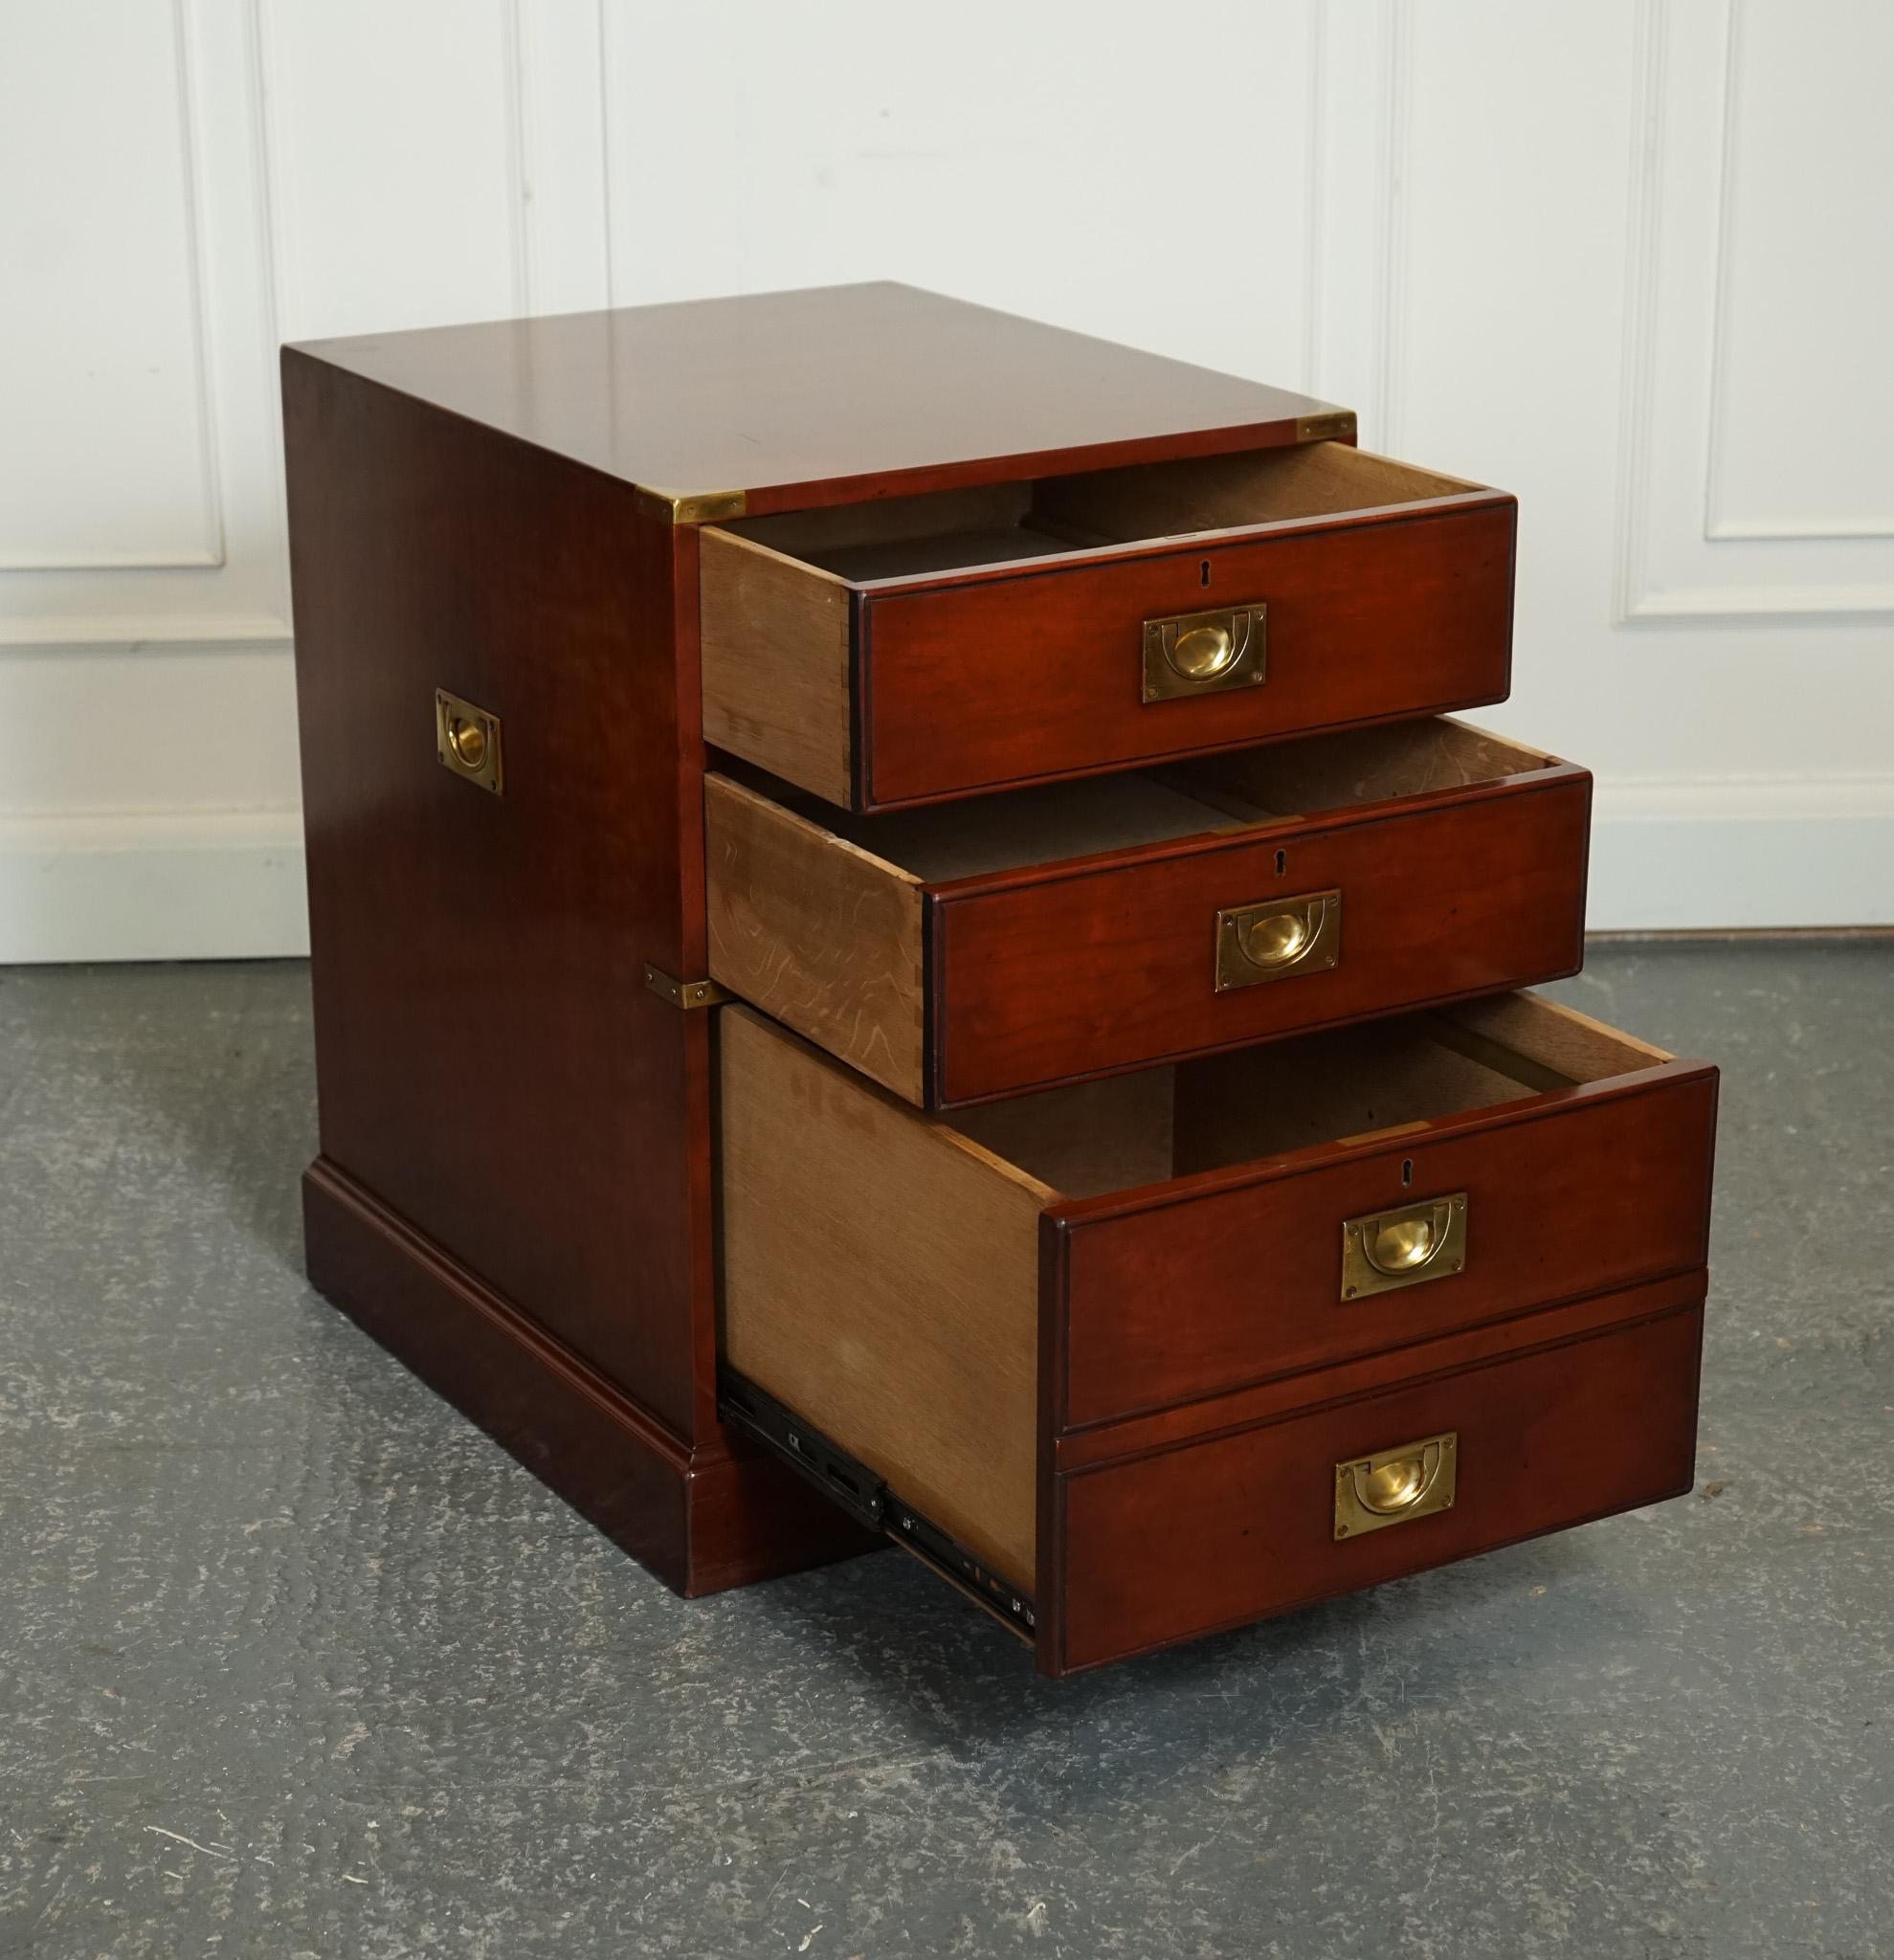 
We are delighted to offer for sale this Kennedy Harrods Military Campaign Office Filing Cabinet. Matching One Available

The stunning Kennedy Harrods Military Campaign Office Drawers Filling Cabinet J1 is an exceptional piece of furniture that